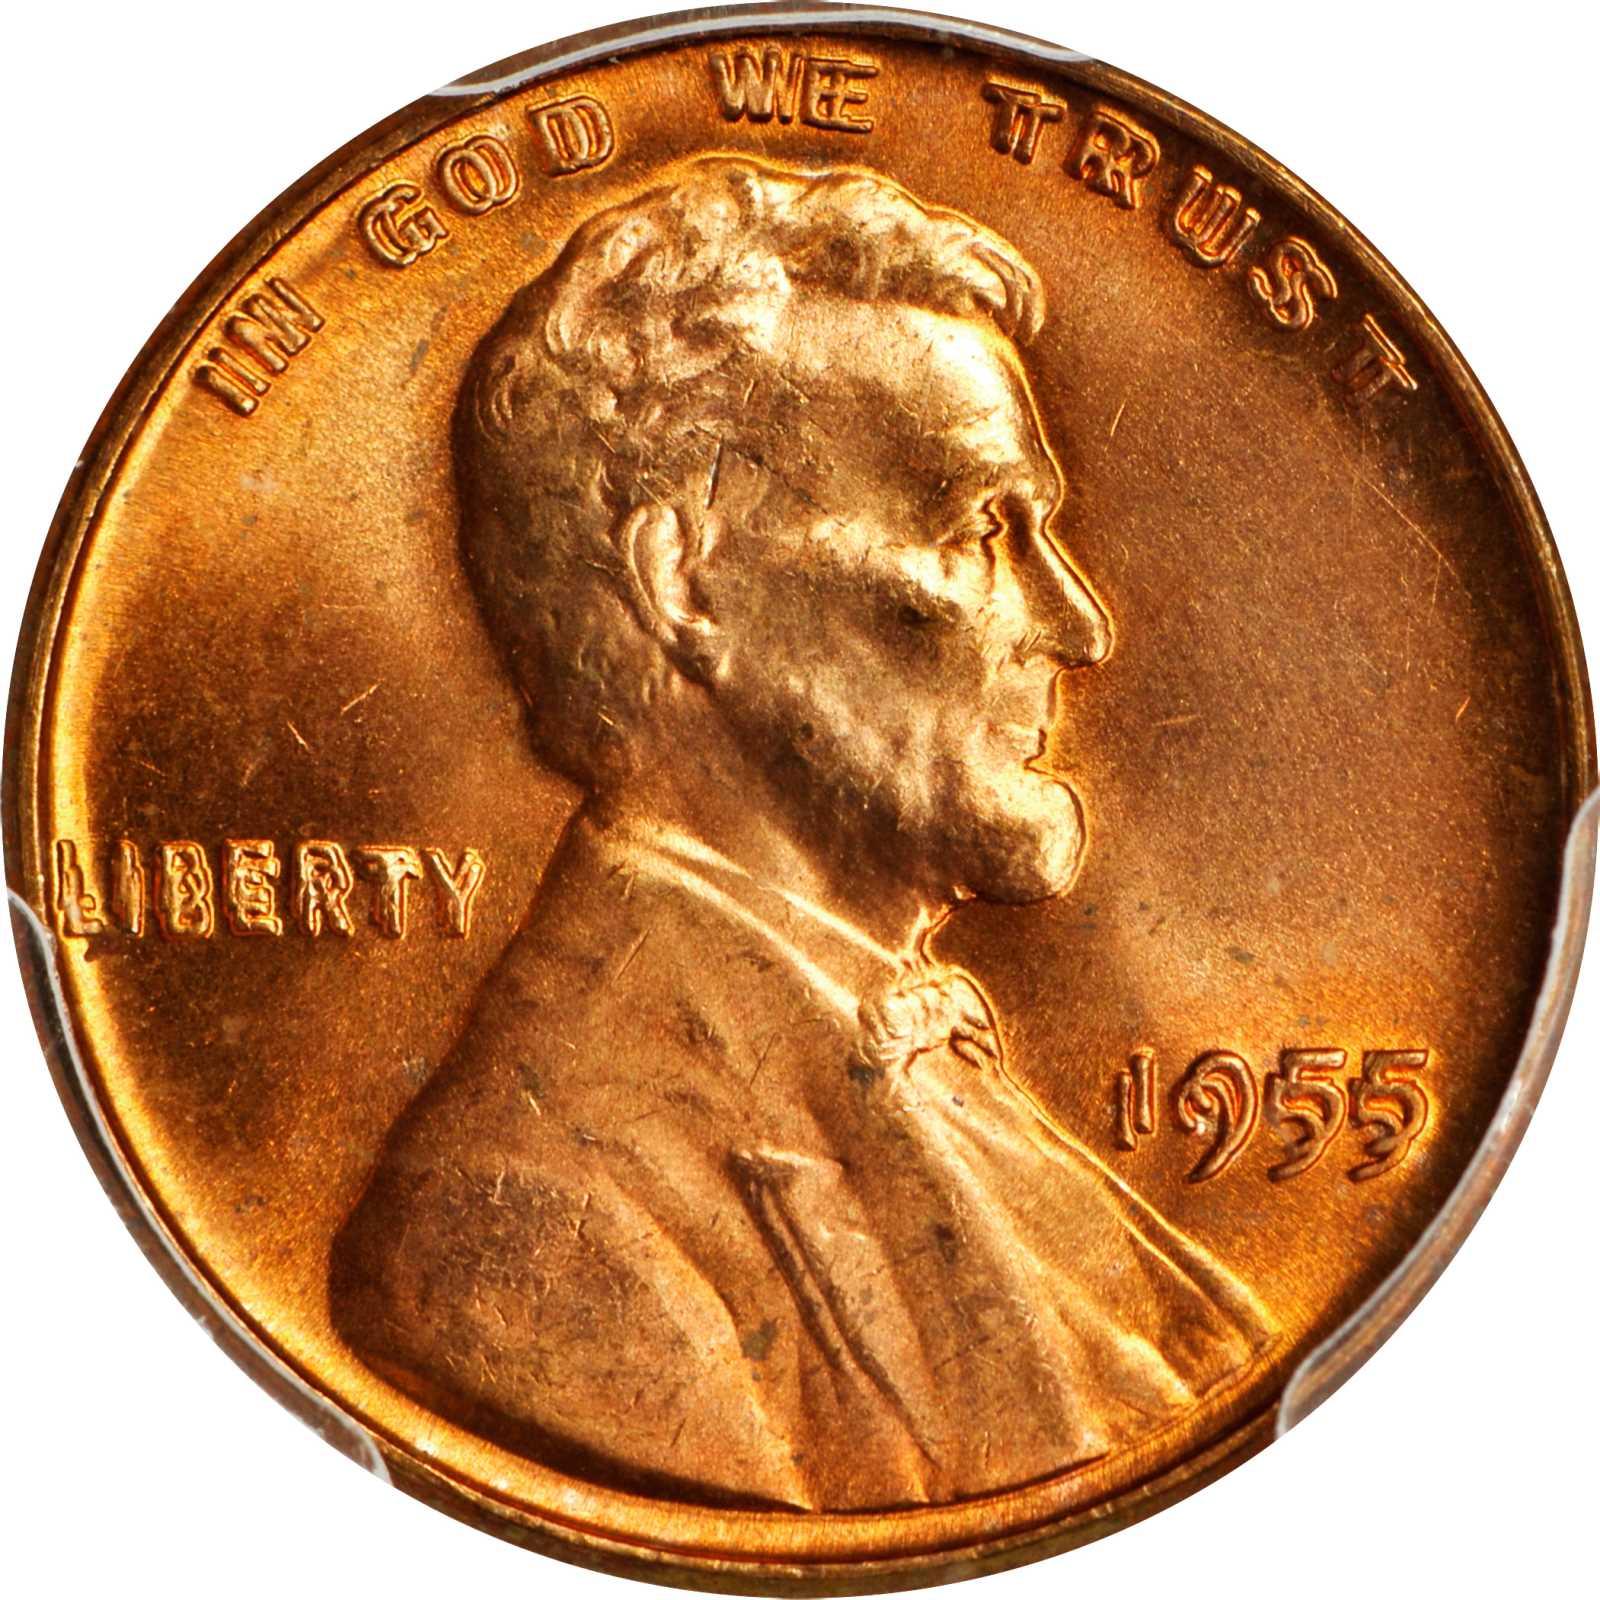 1955 DDO Lincoln wheat cent. Image courtesy of Stacks and Bowers